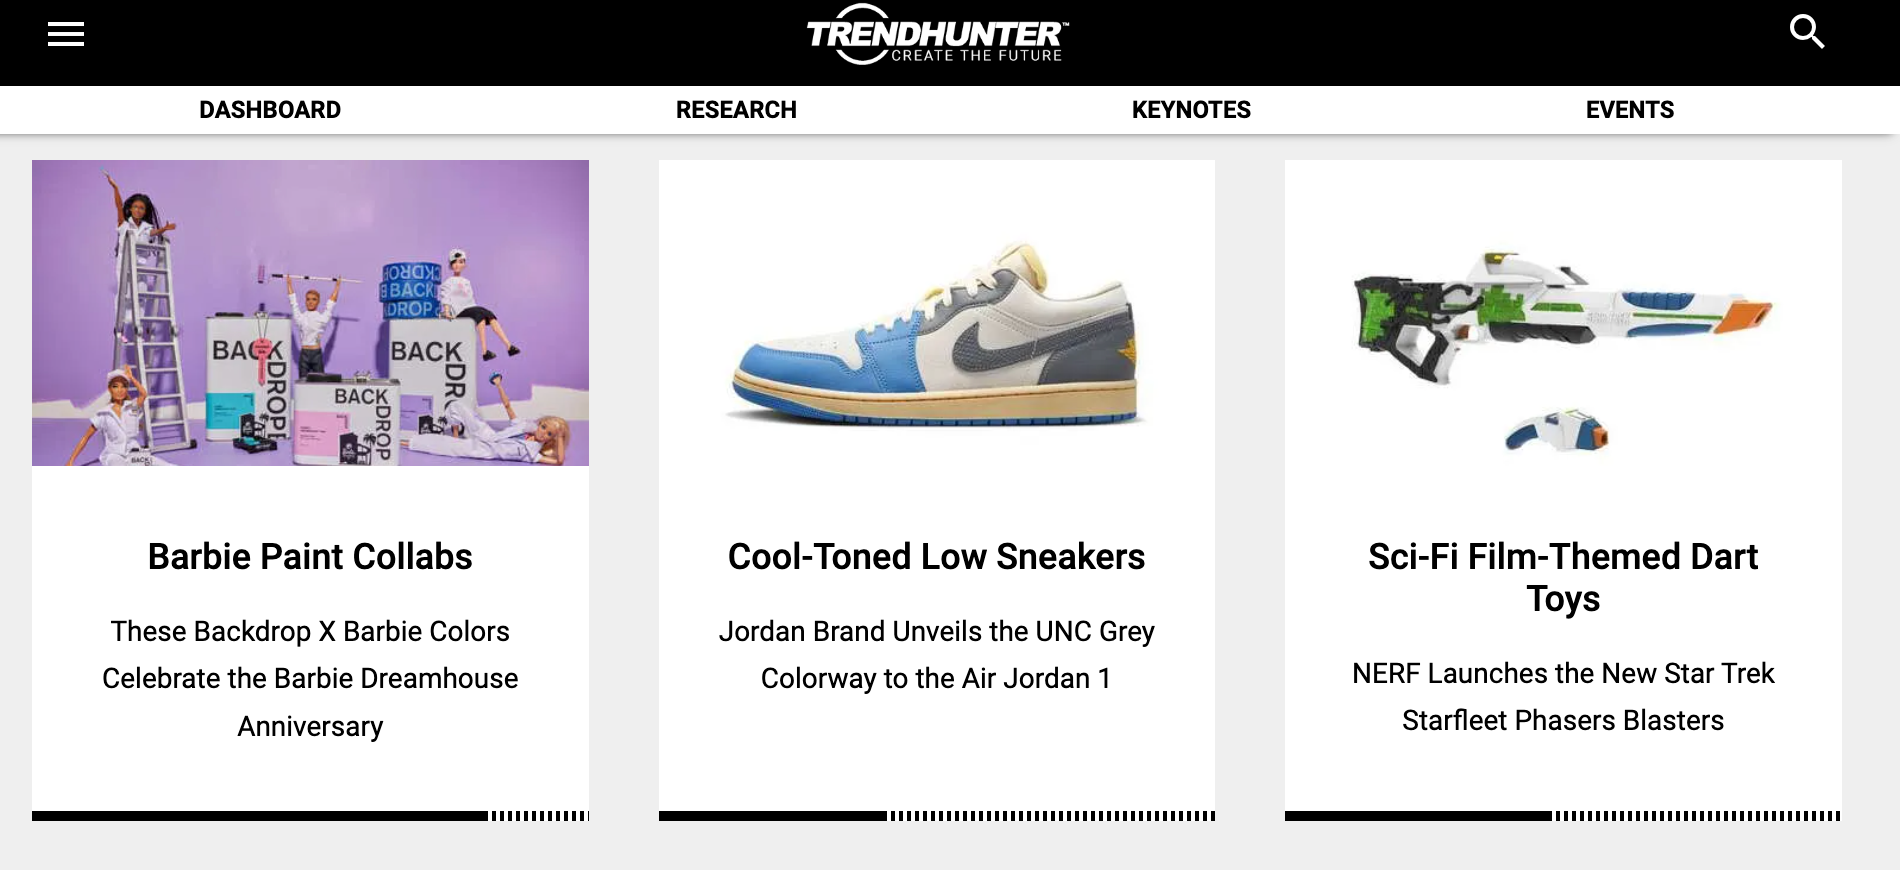 Trendhunter’s recent trend articles for Barbie paint collabs, cool-toned low sneakers, and sci-fi dart toys.